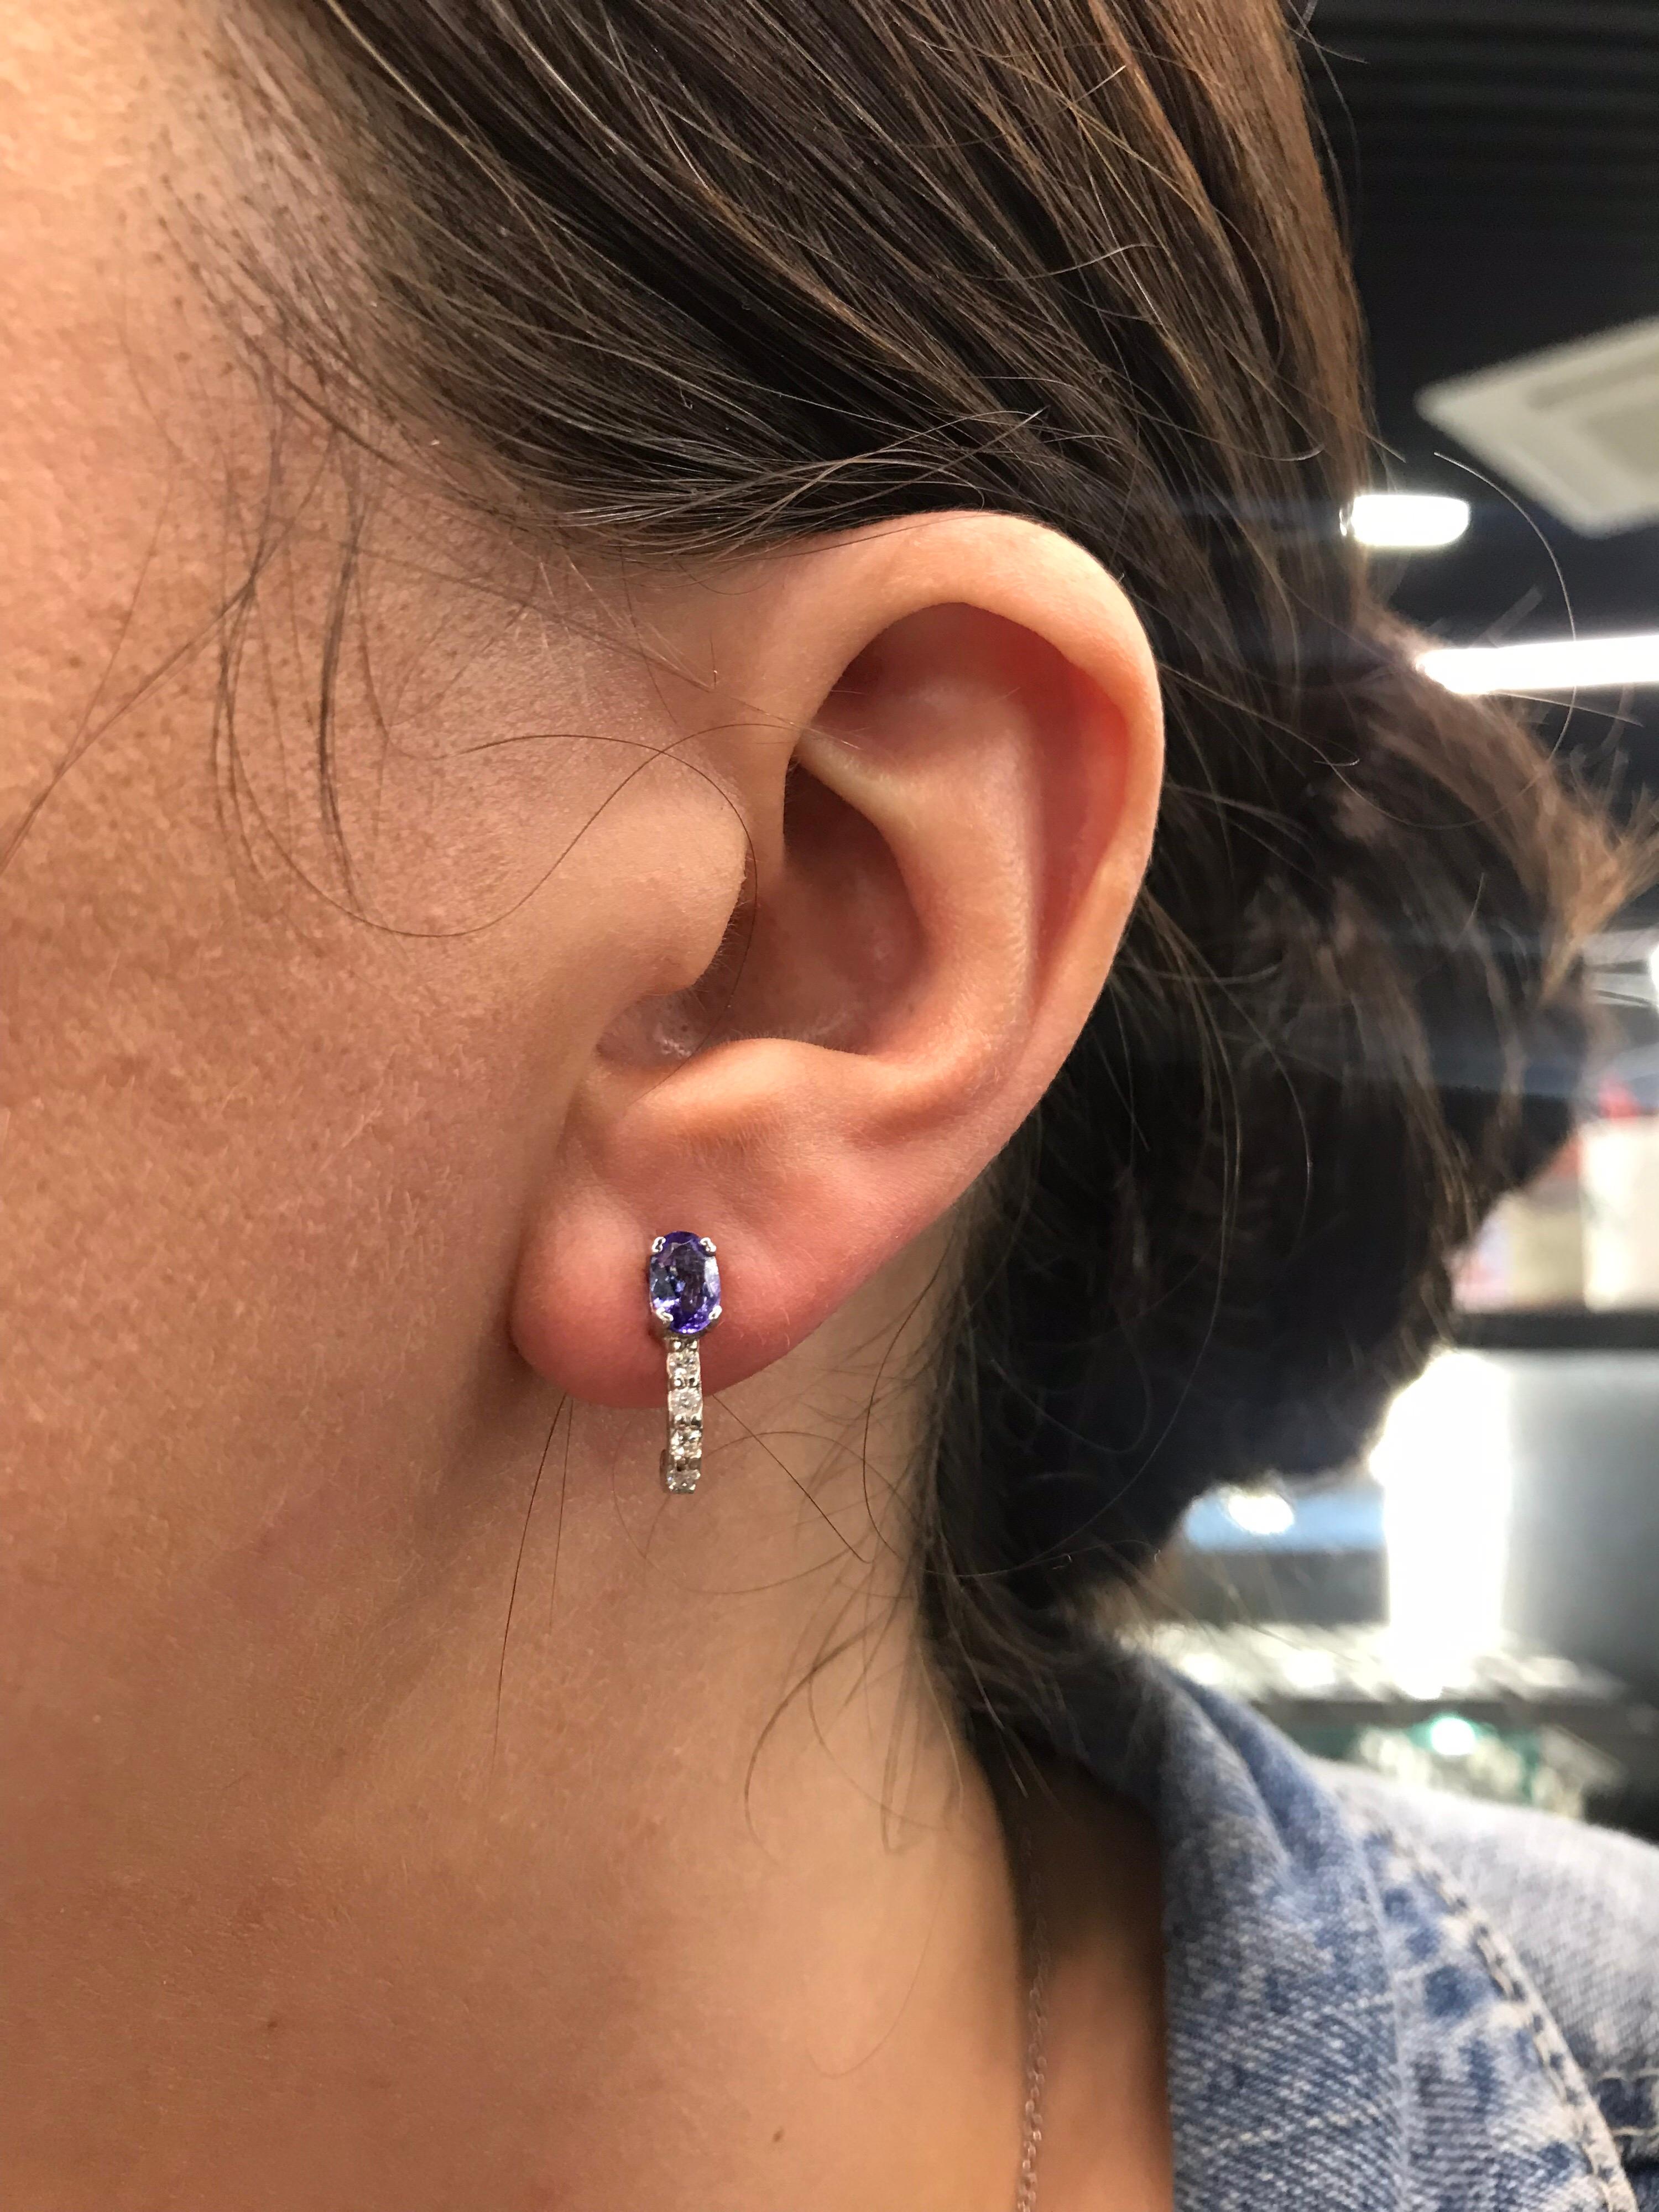 14K White Gold huggie earrings featuring two oval cut tanzanites weighing 1.00 carats with round brilliants weighing 0.17 carats.
Color G
Clartiy VS-SI